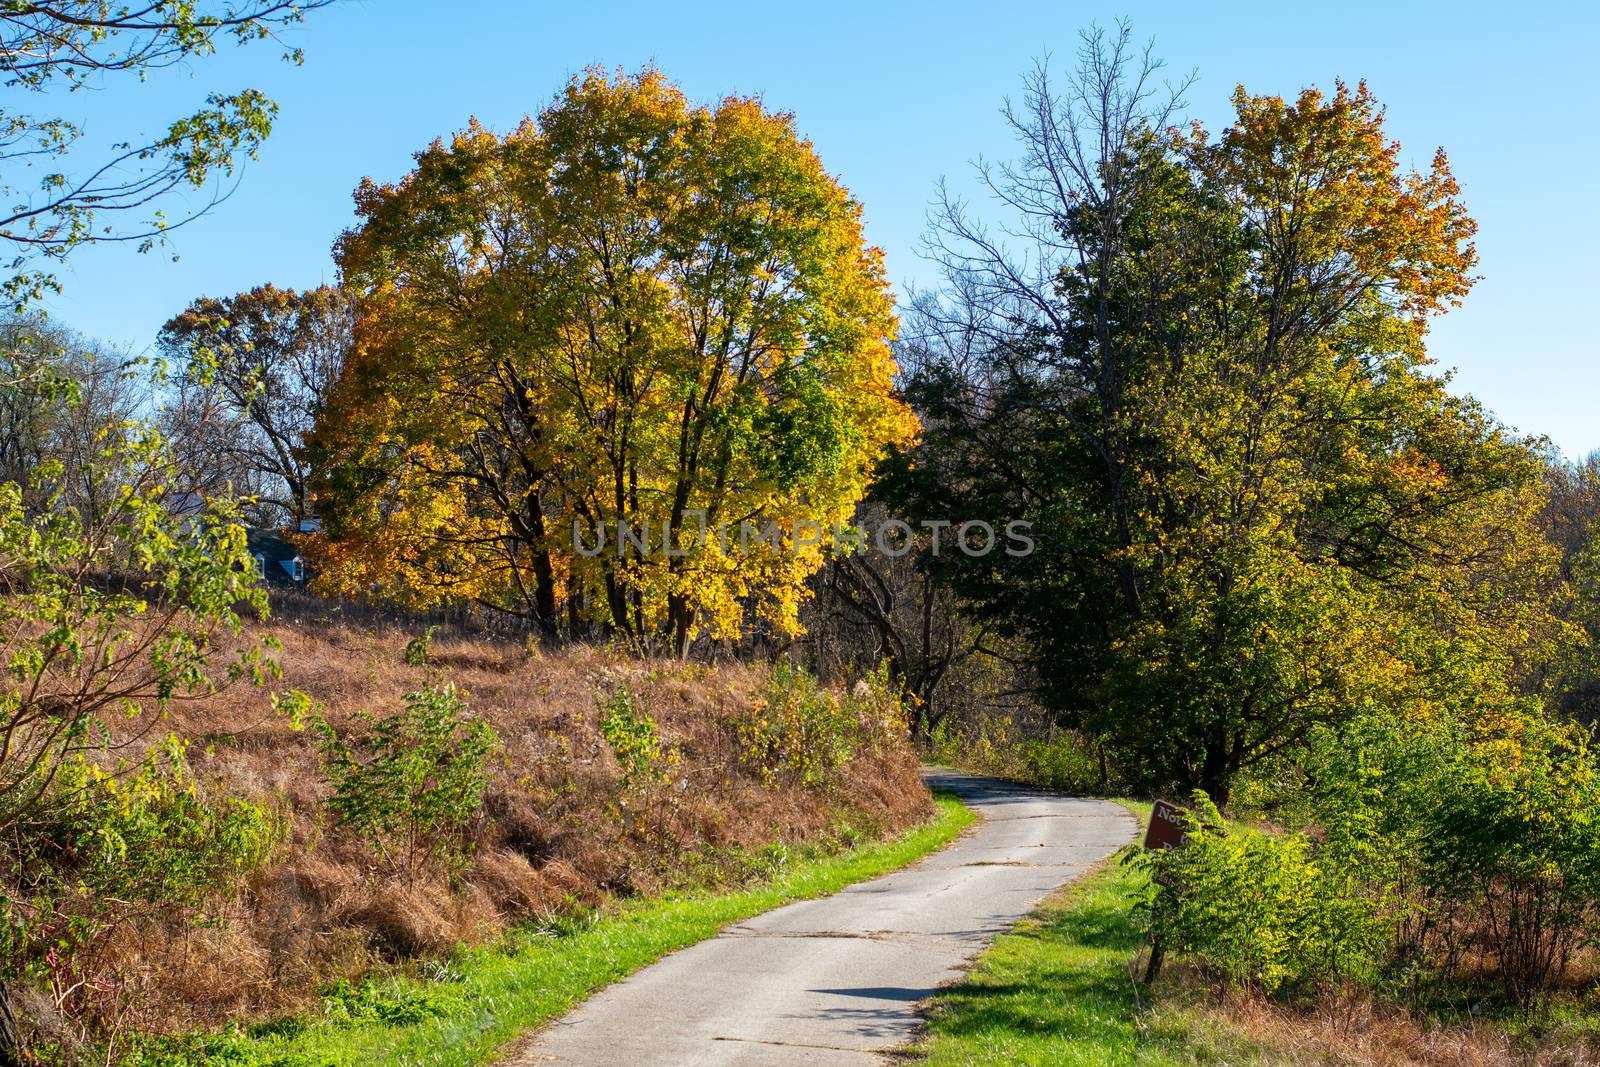 A Pathway Leading Into an Autumn Forest at Valley Forge National by bju12290